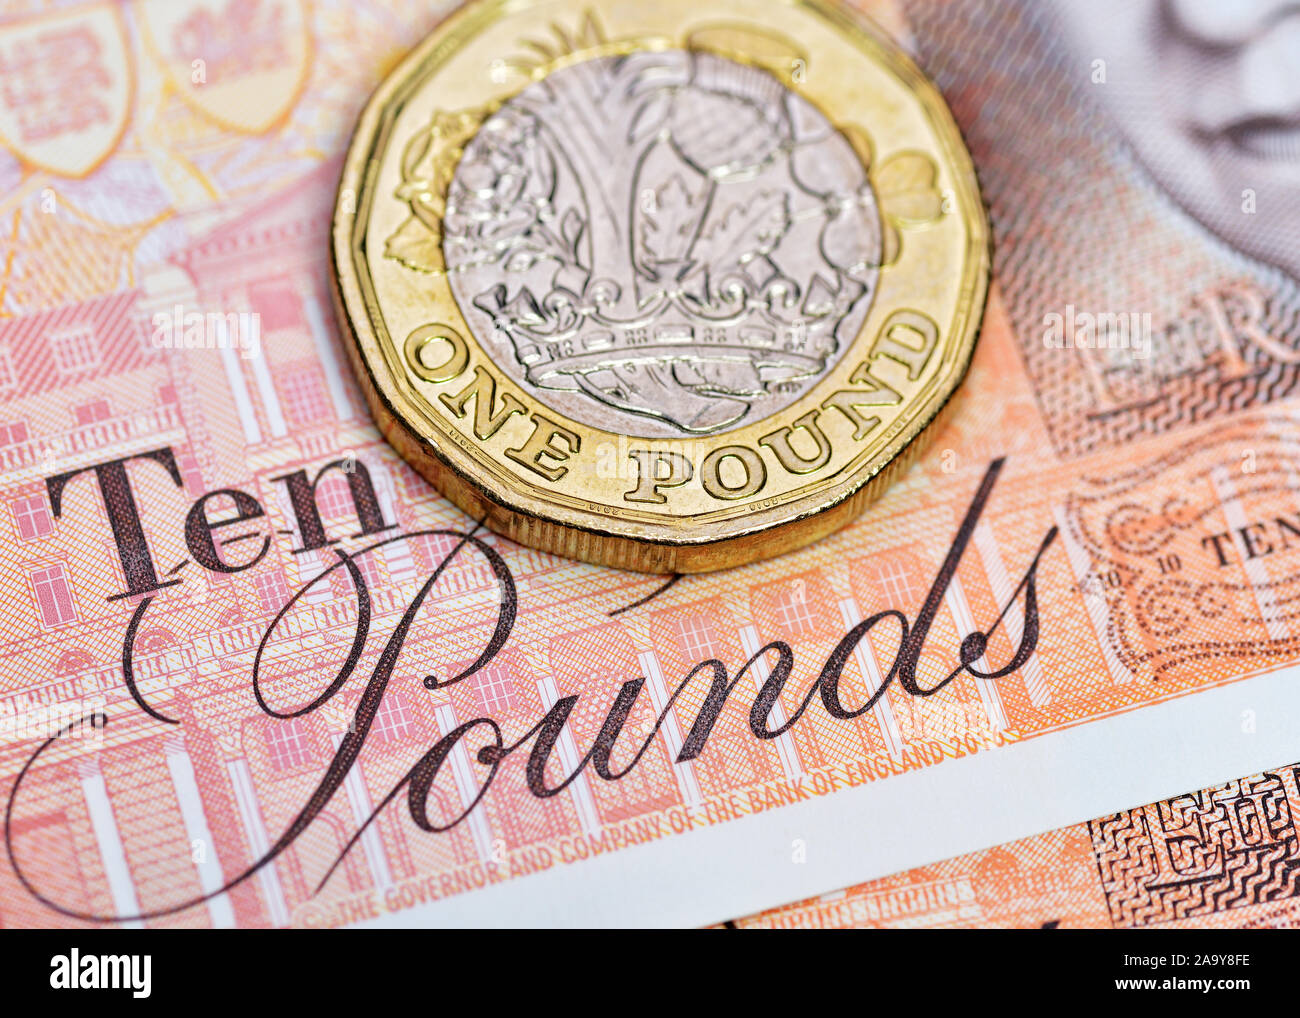 Pound Coin on a Ten Pound Note, British Currency, Close Up Stock Photo